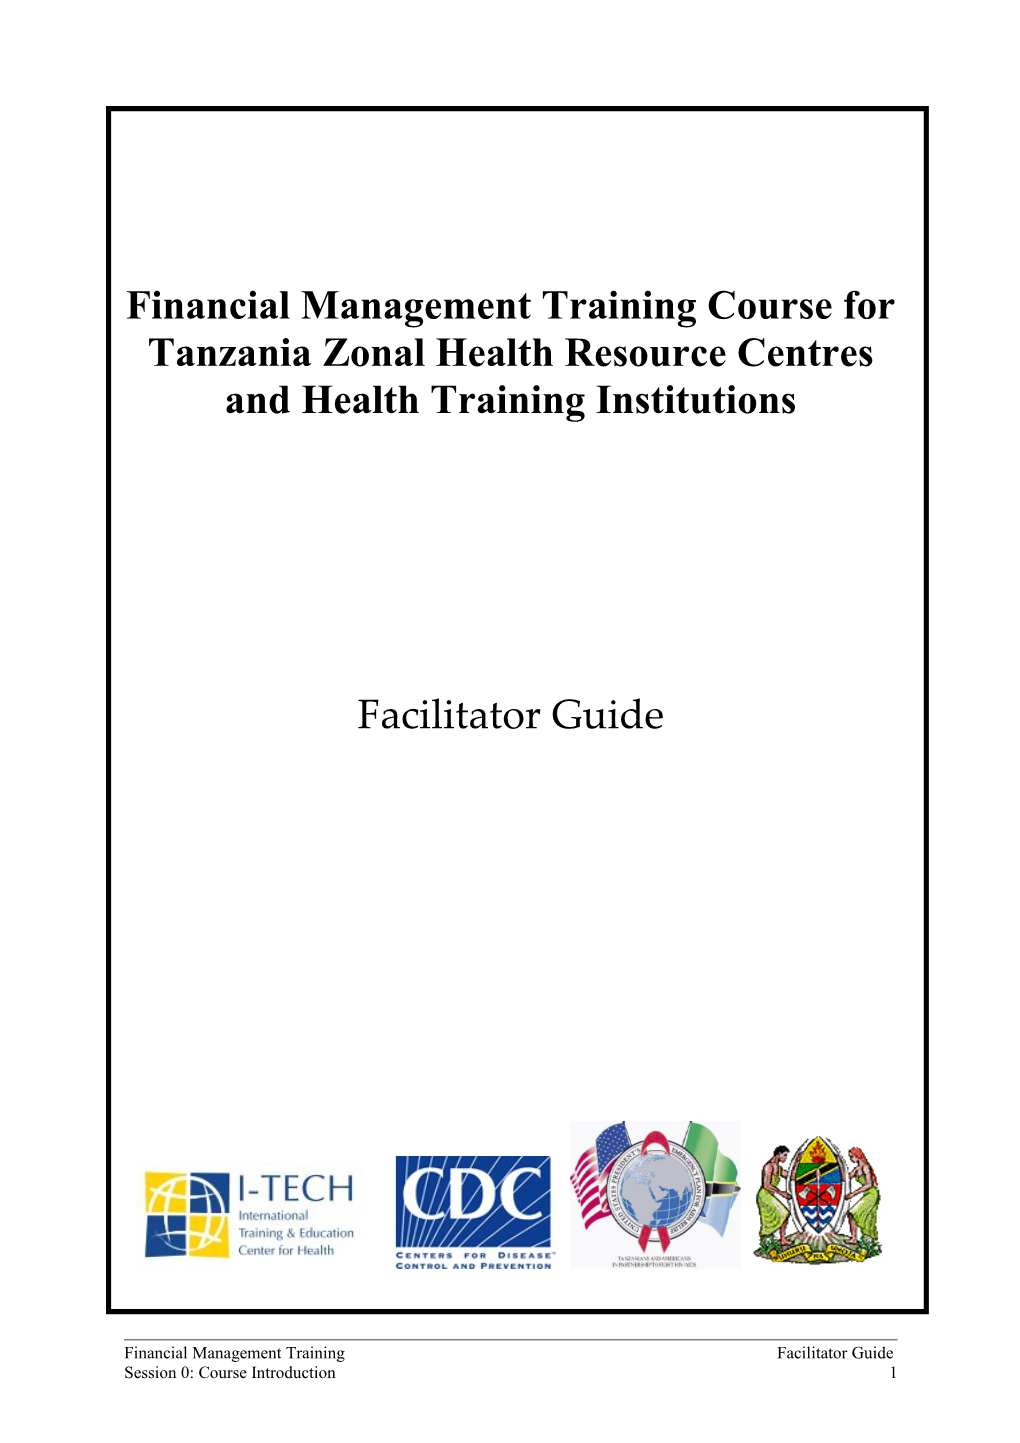 Financial Management Training Course for Tanzania Zonal Health Resource Centres and Health